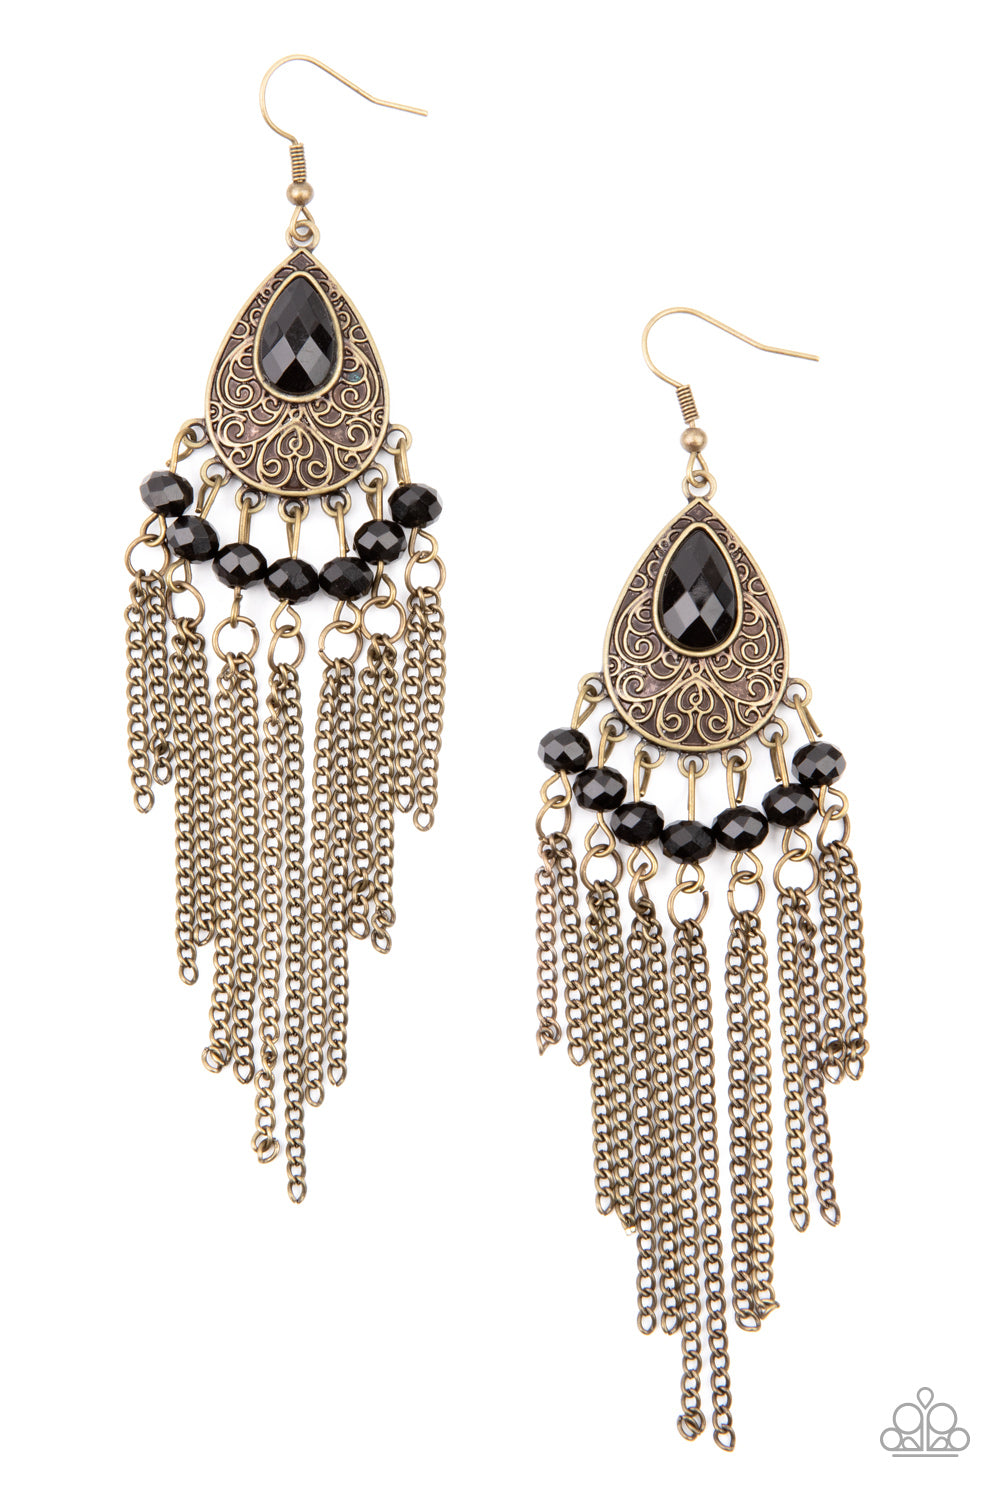 Paparazzi Floating on HEIR - Brass Earrings - A Finishing Touch Jewelry